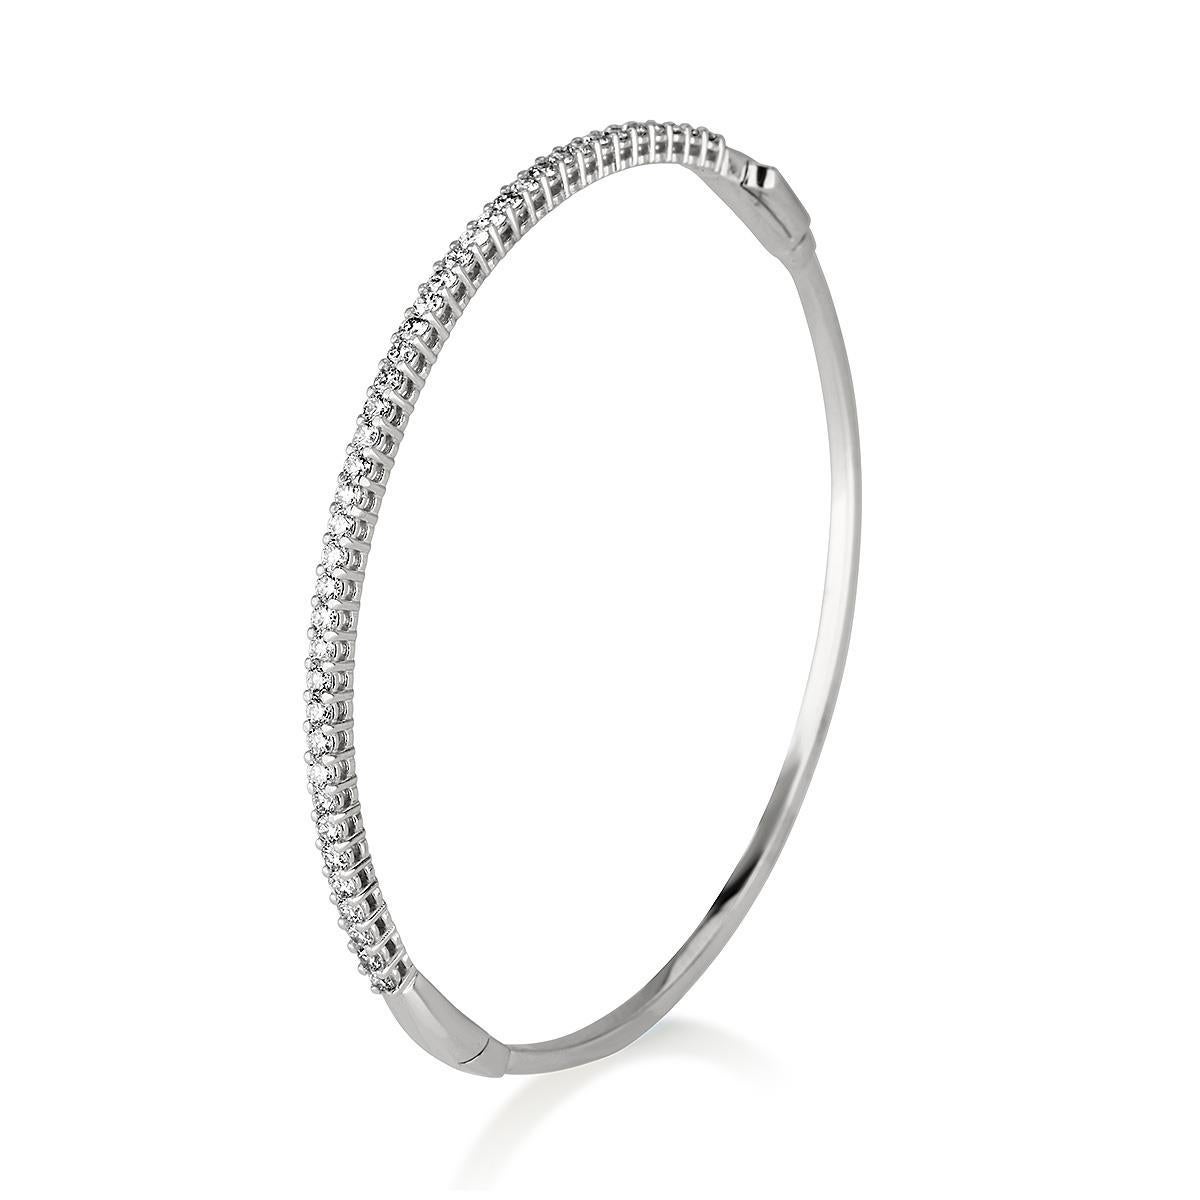 1.00 Carat Pave Diamond Bangle Bracelet in 14 Karat White Gold - Shlomit Rogel

Glamorous sparkle meets a classic design in this beautifully elegant bangle bracelet. Crafted from 14k solid white gold, the bracelet is pave set with 41 round genuine